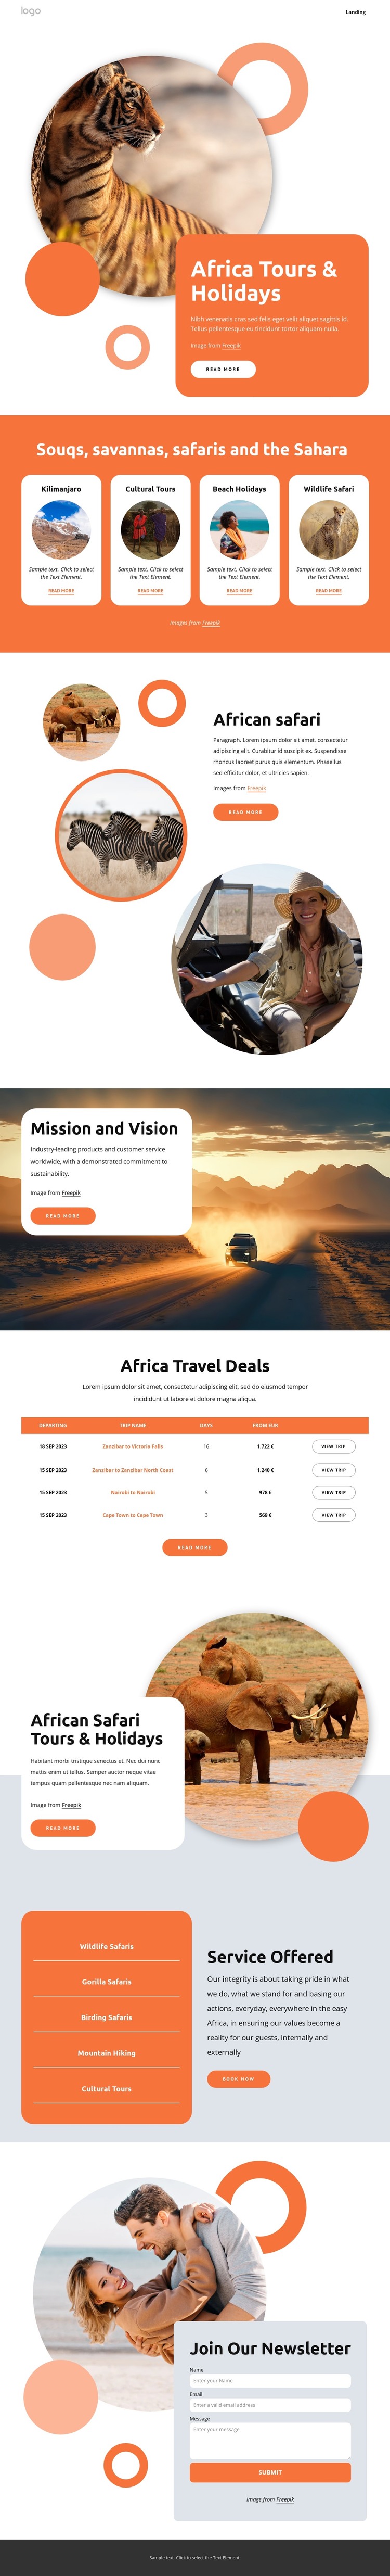 Africa tours and holidays Web Design